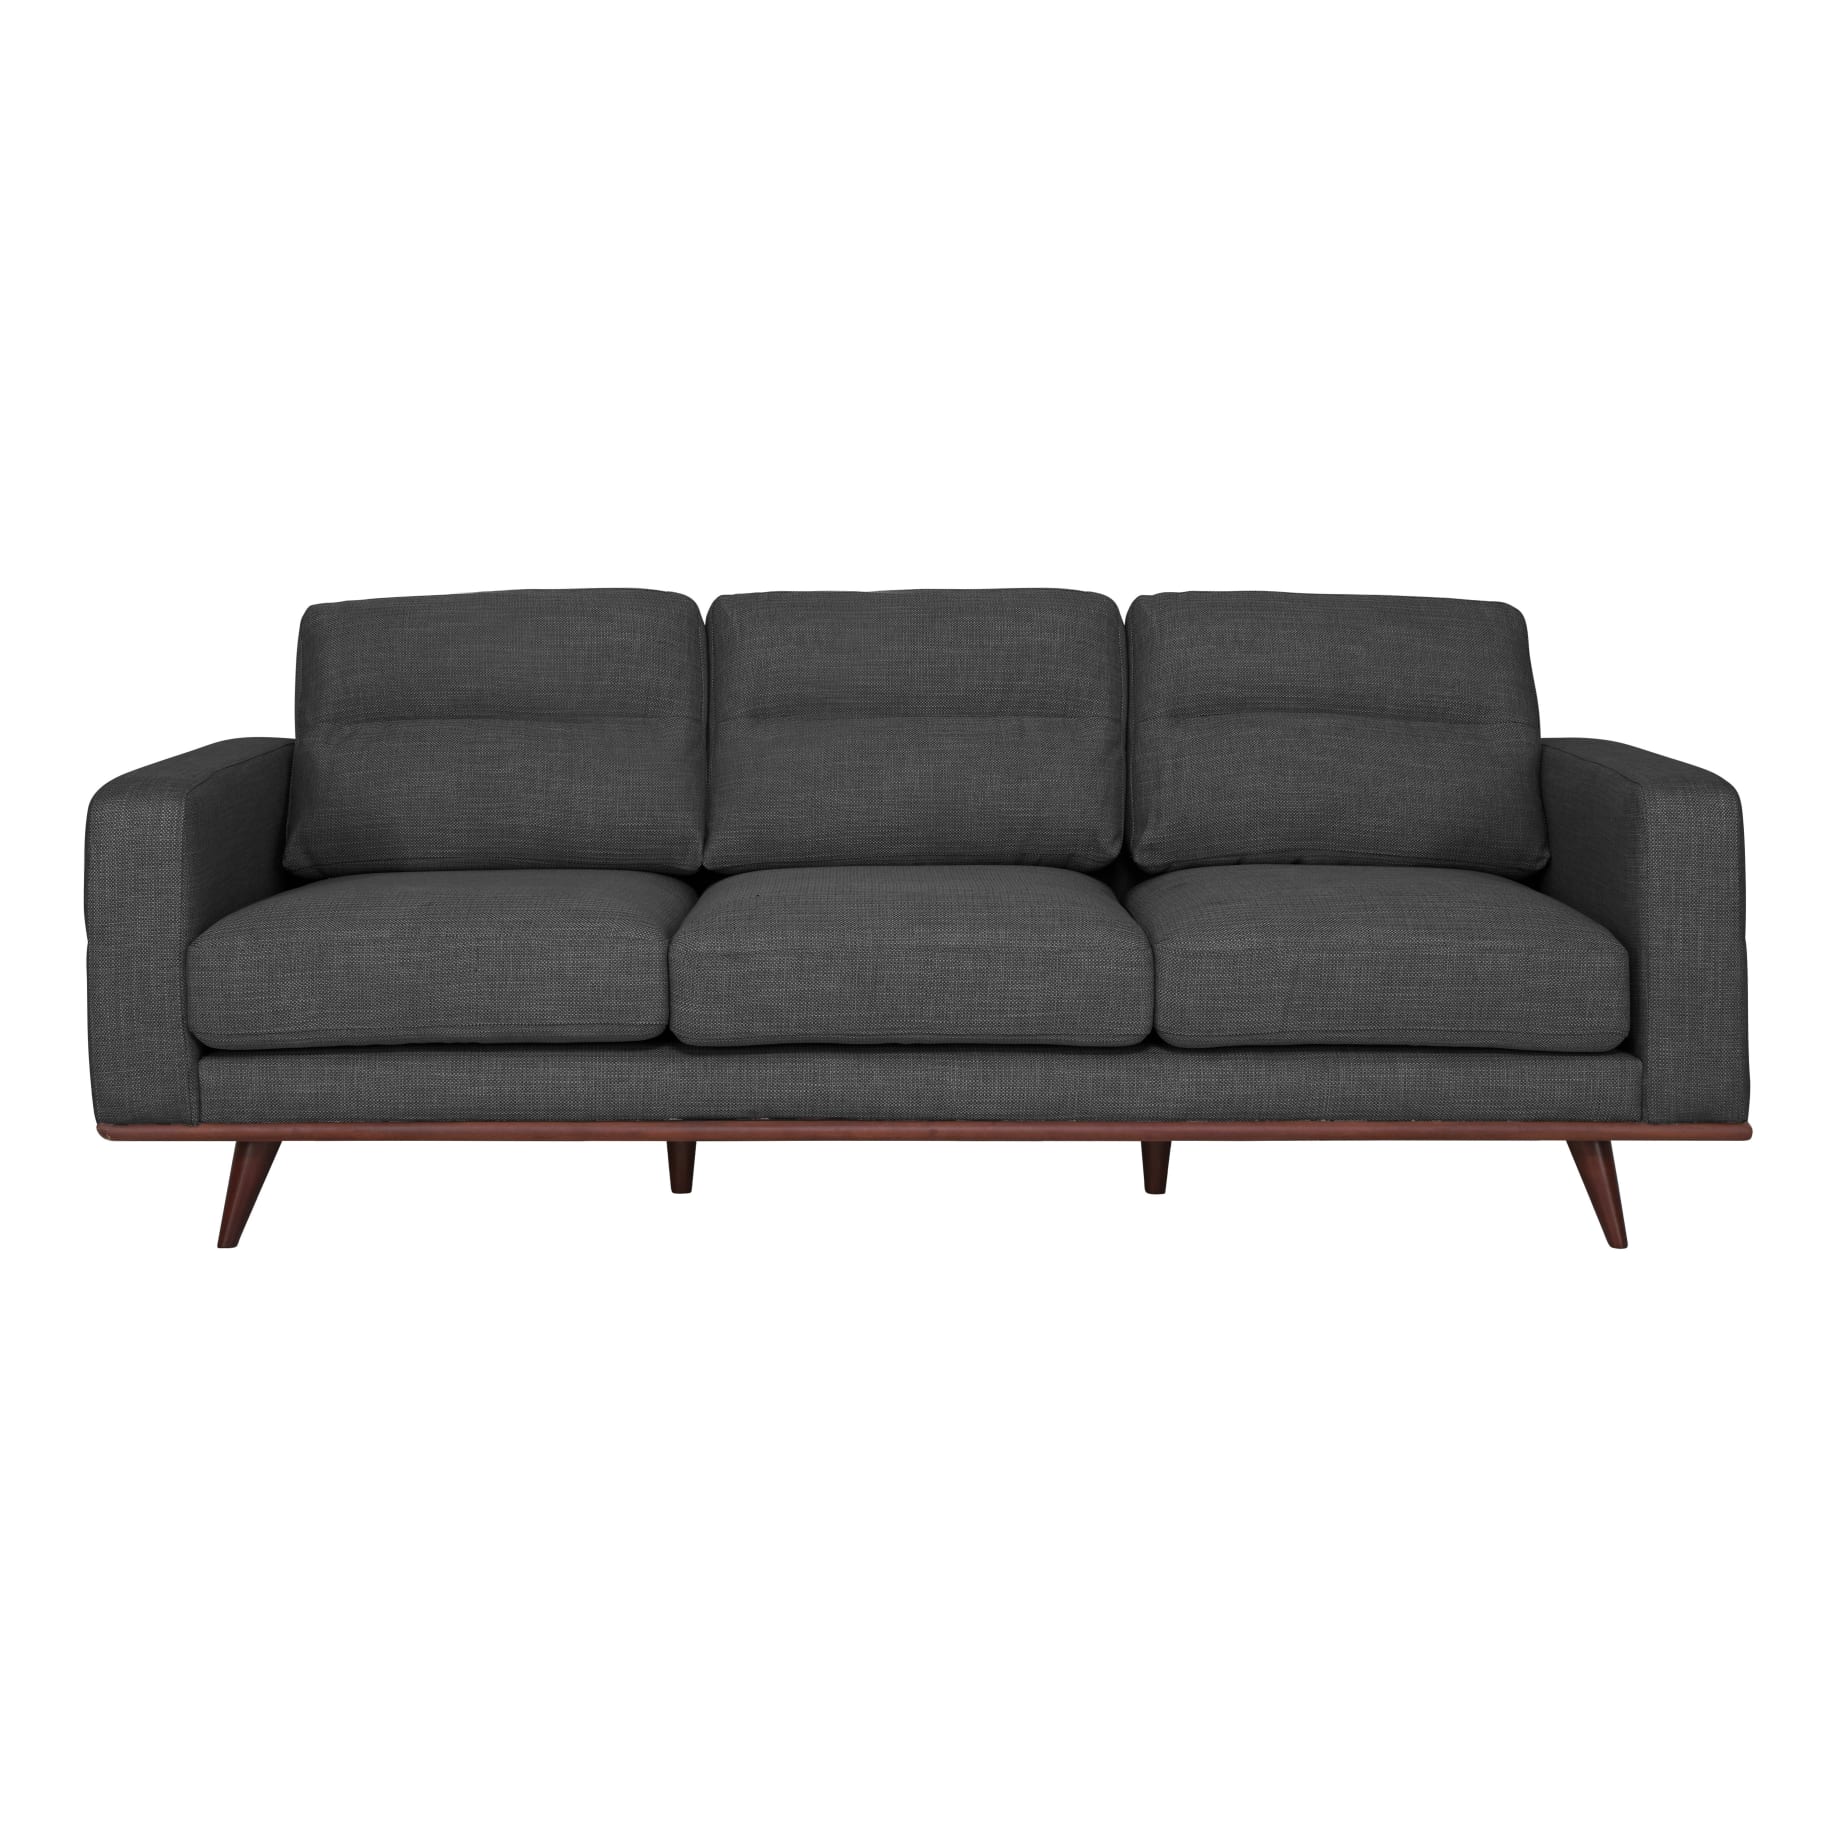 Astrid 3 Seater in Talent Charcoal